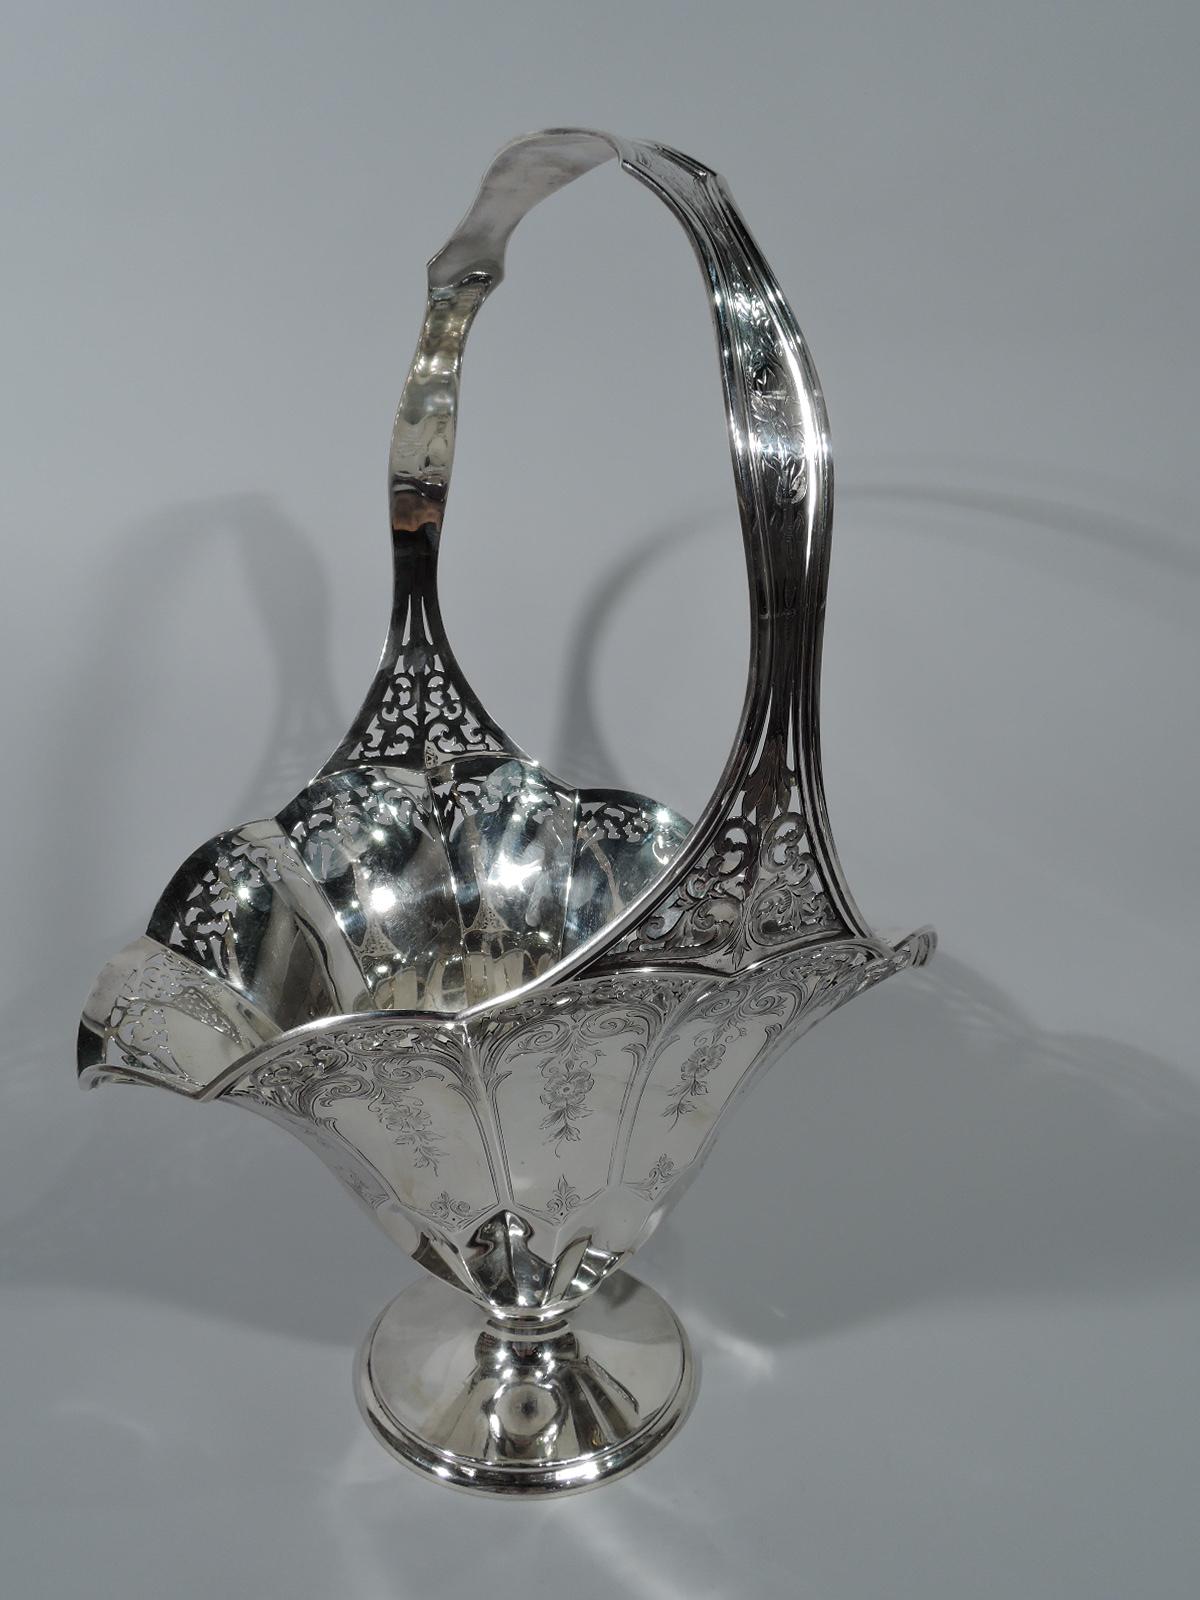 Edwardian sterling silver basket. Made by Gorham in Providence in 1915. Faceted and tapering with wide oval mouth, petal rim, shaped stationary handle, faceted bottom, and circular foot. A distinctive updating of a traditional form. On exterior